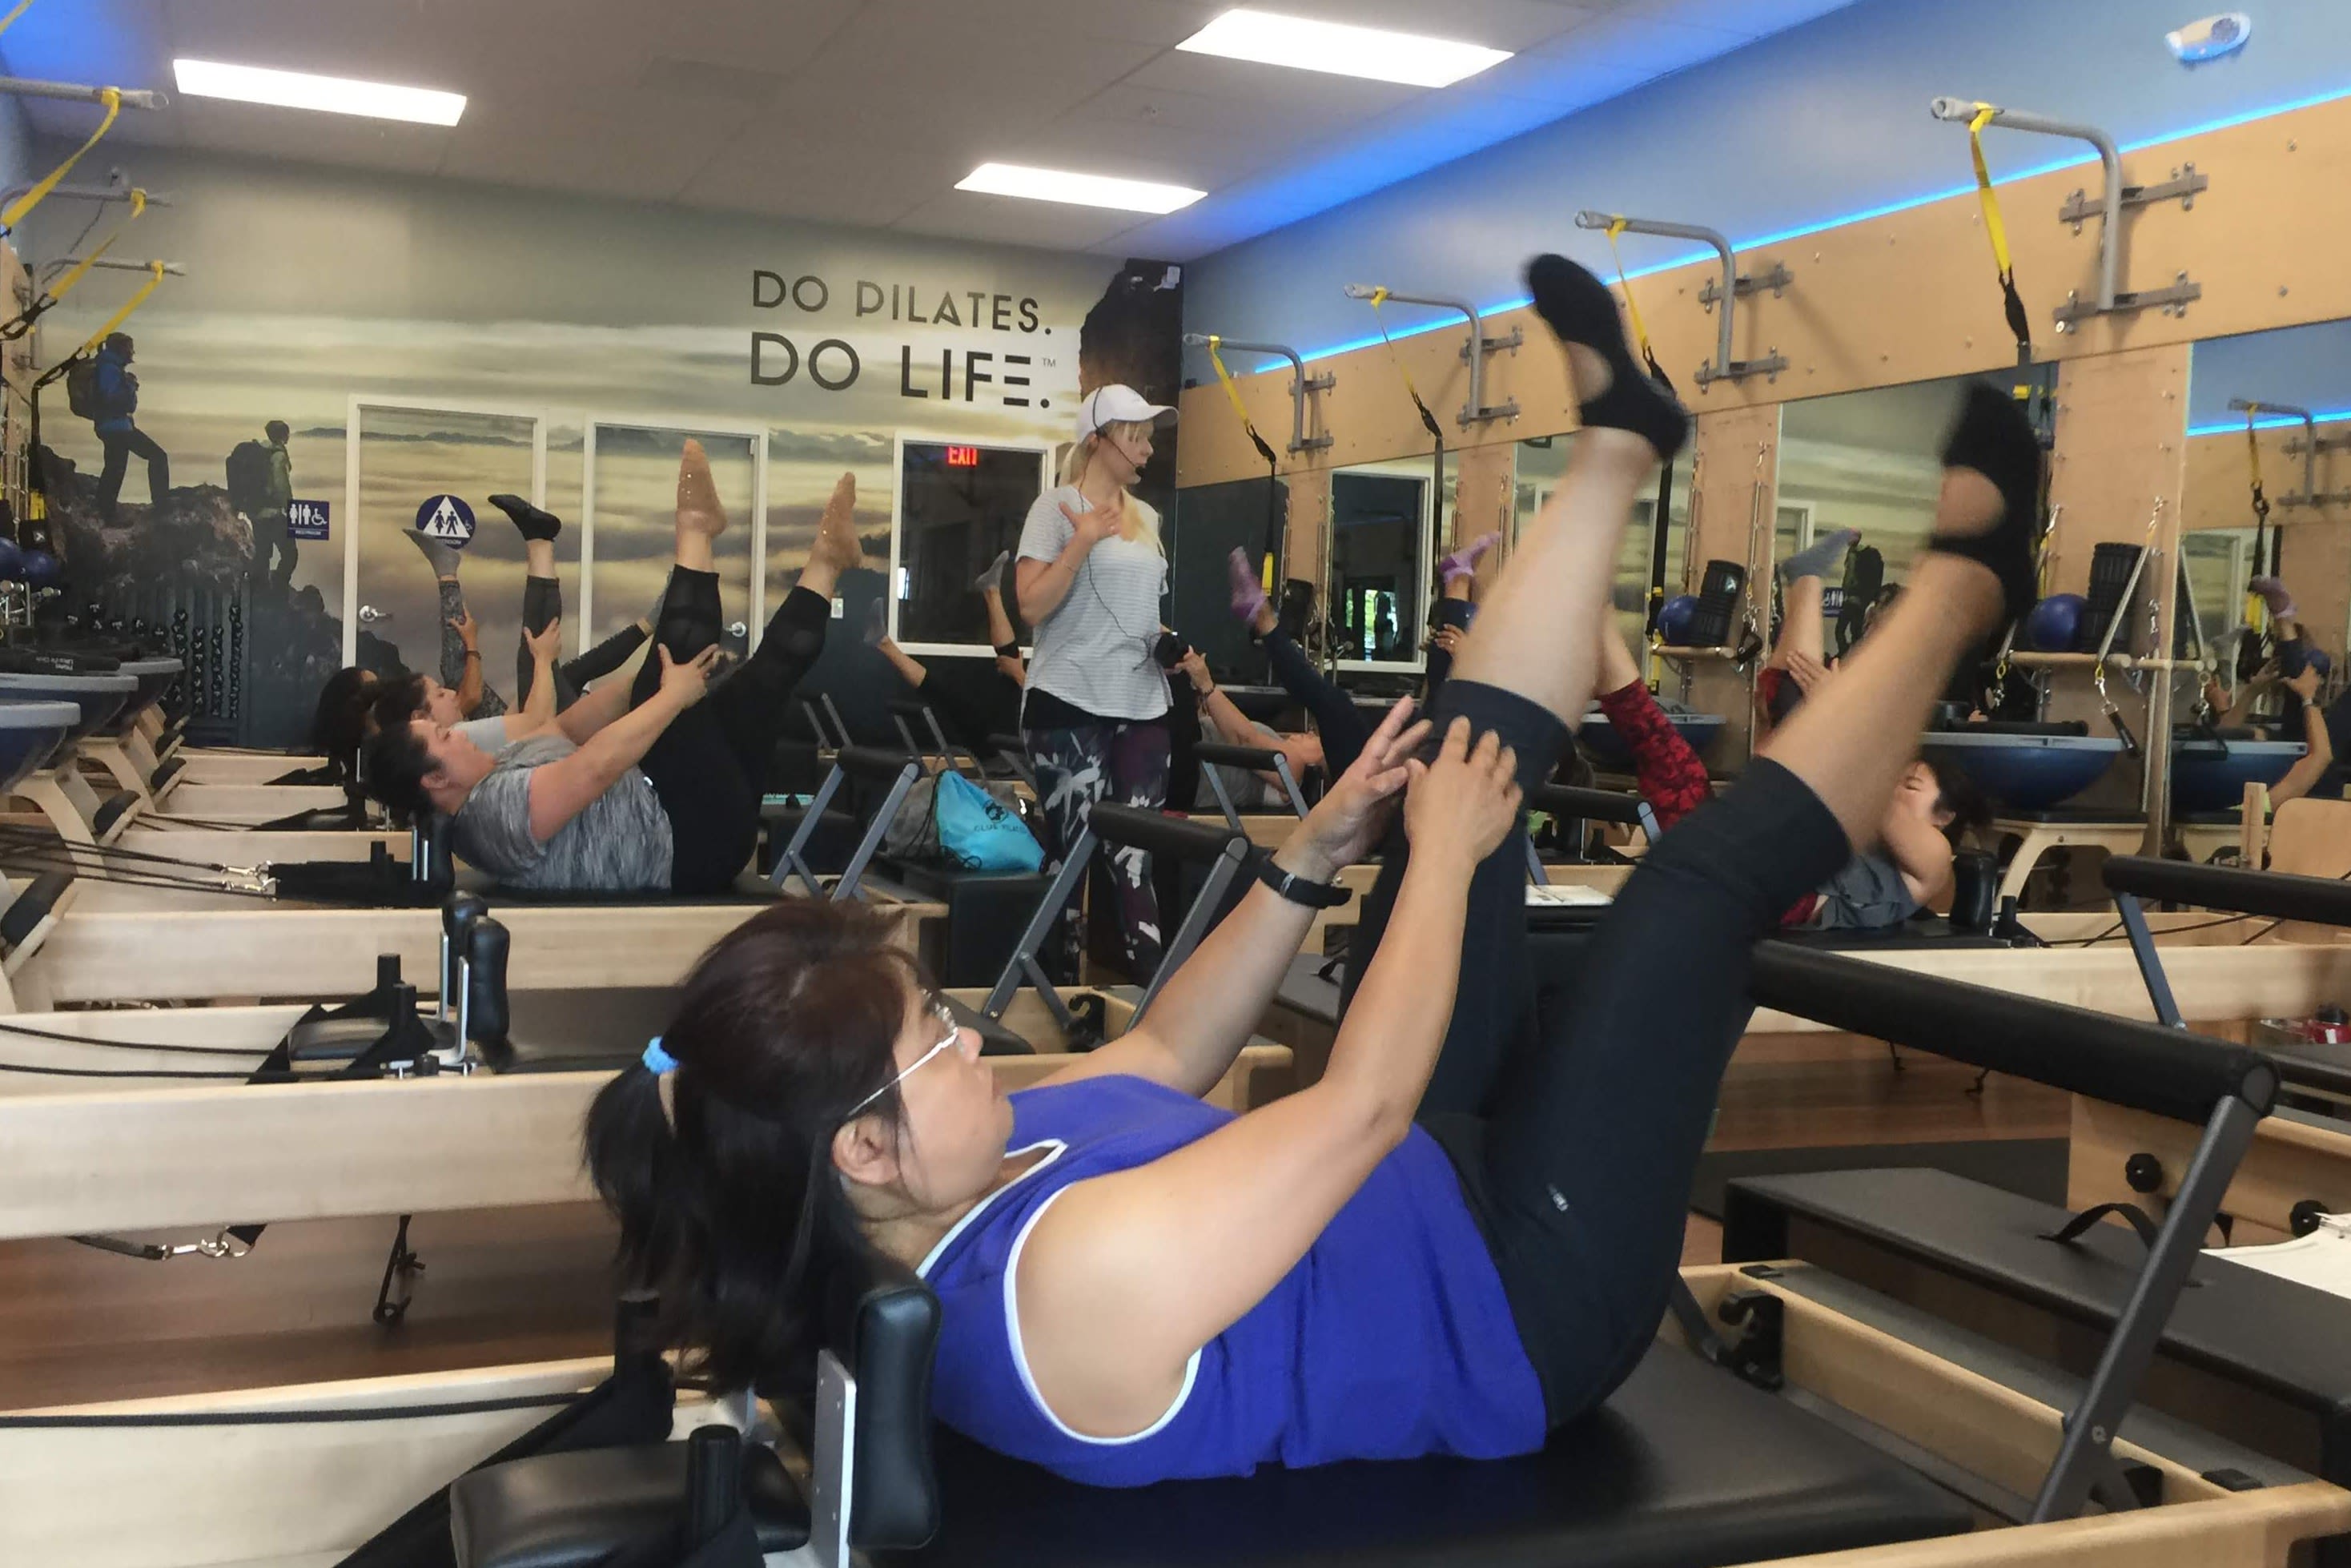 Frequently Asked Questions About Pilates